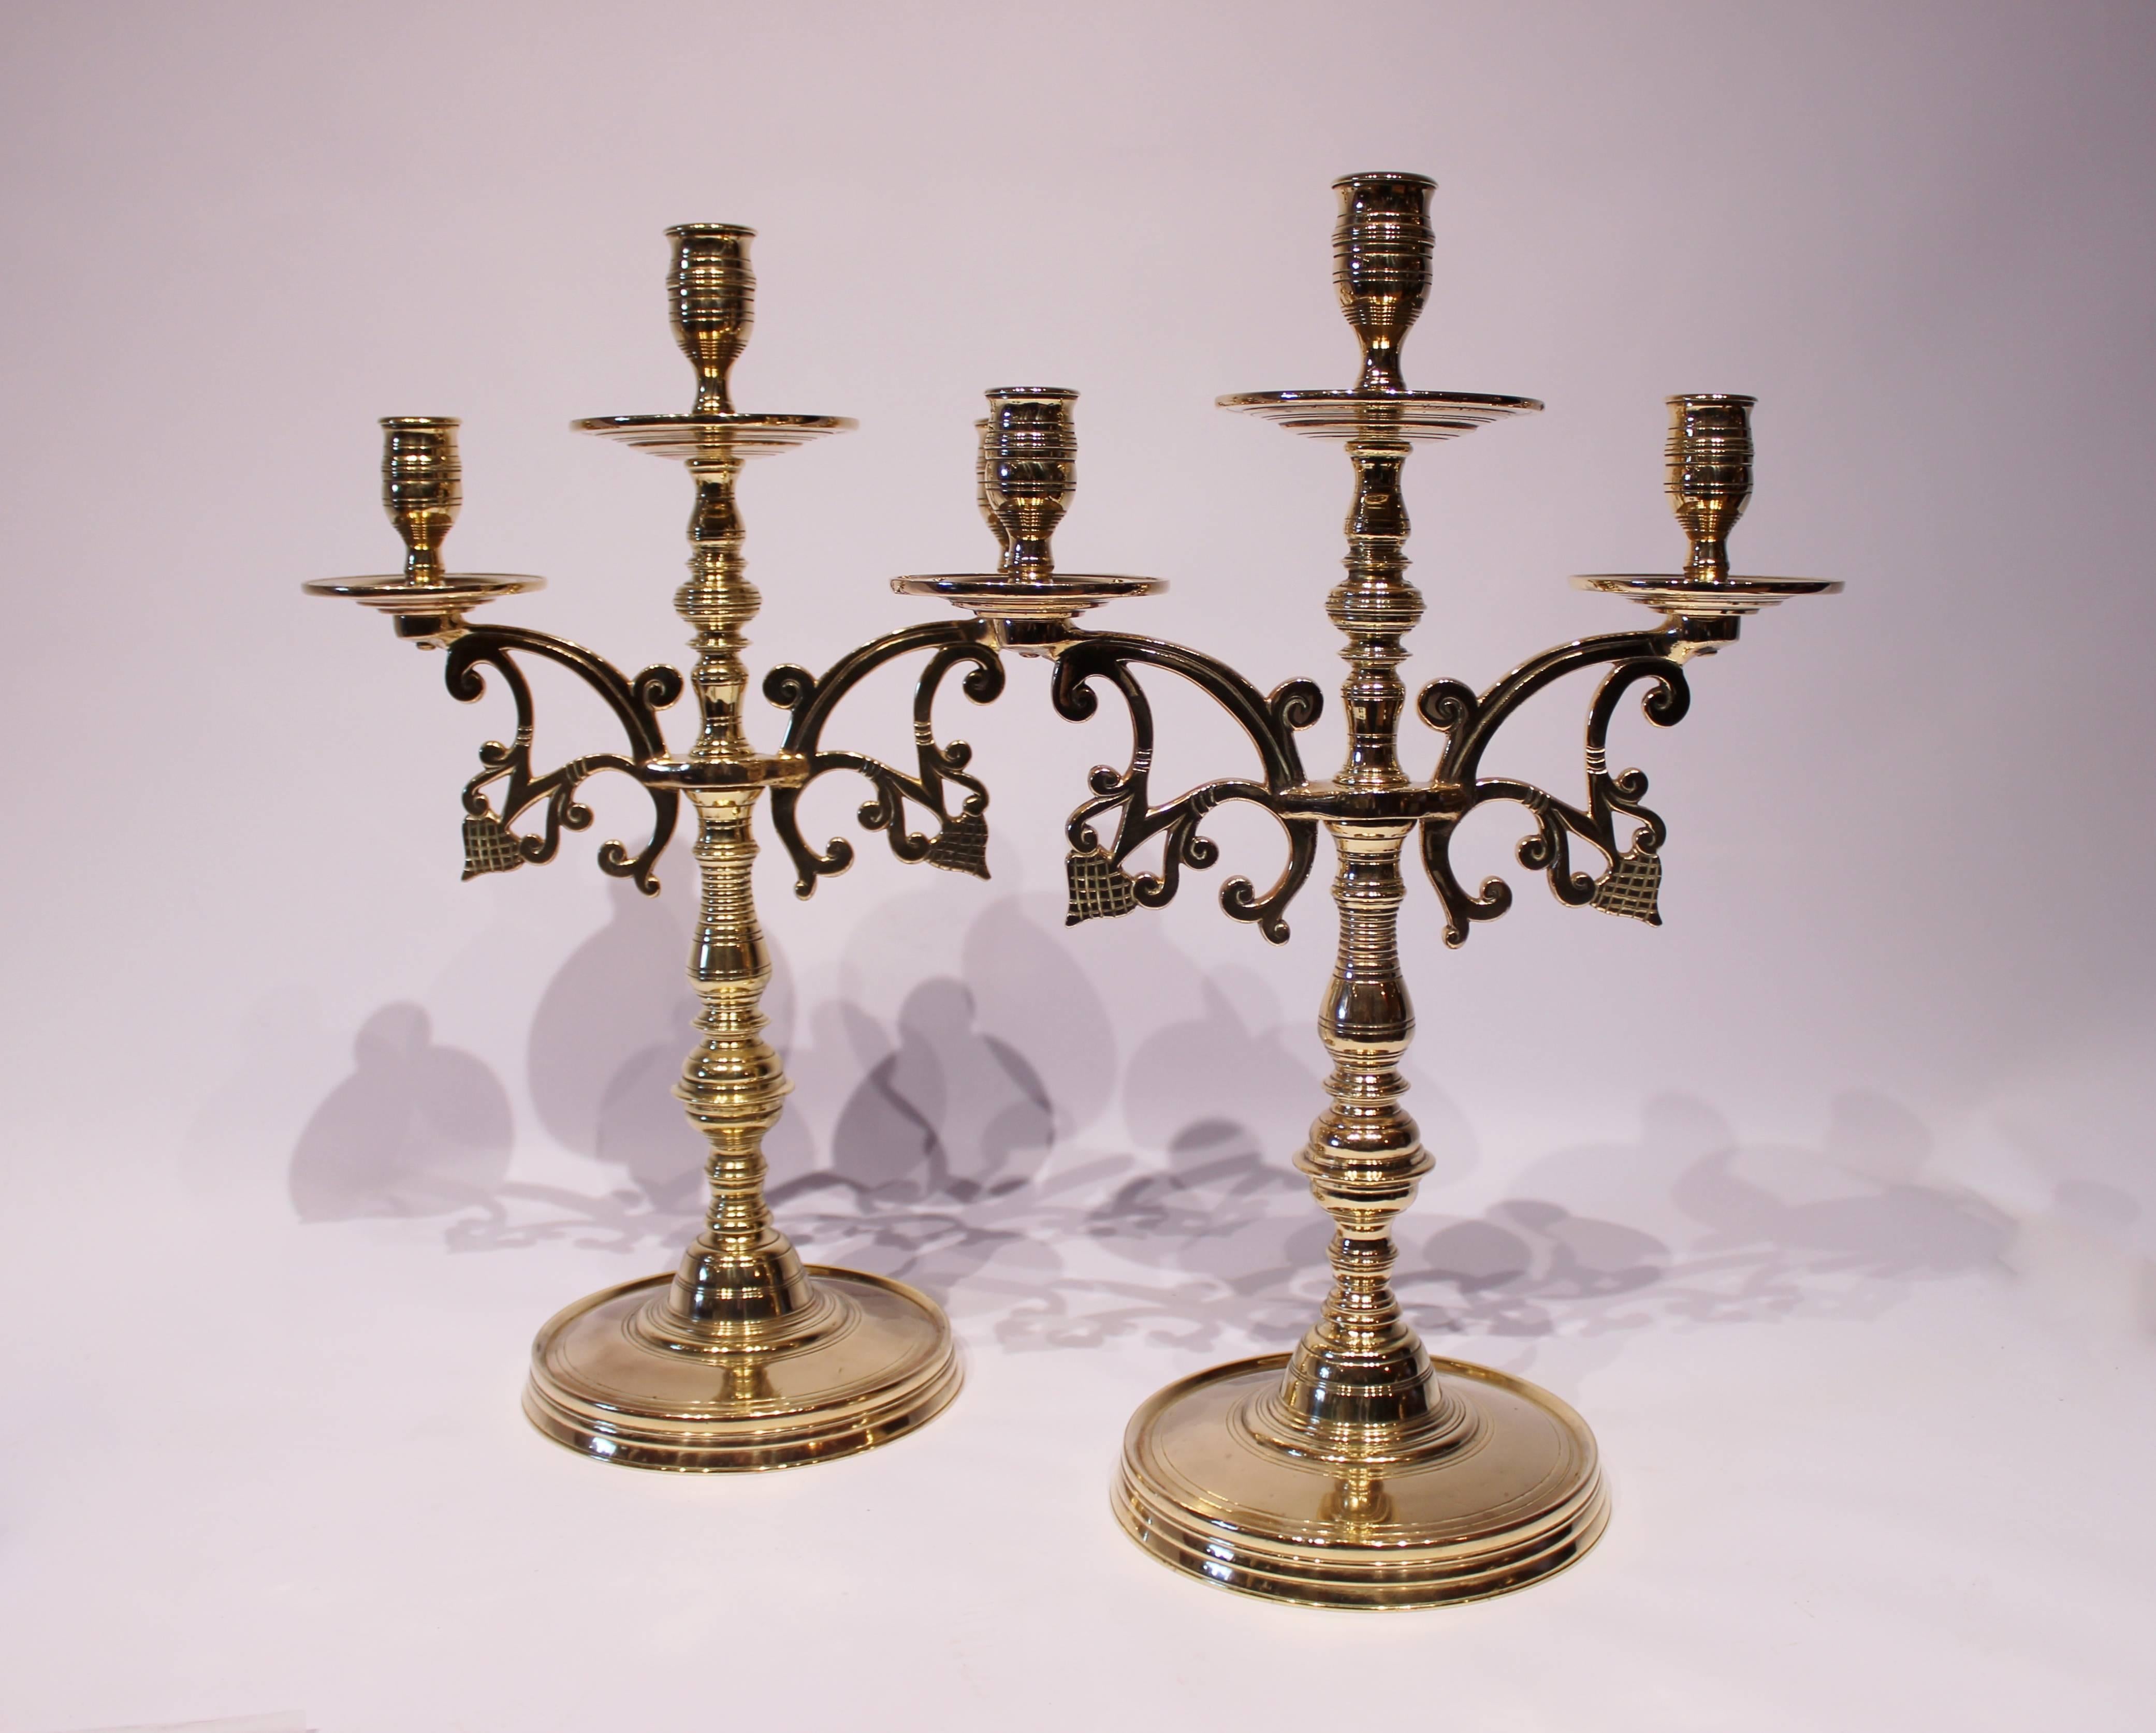 A pair of large three-armed brass candlesticks, in great vintage condition from circa 1890s.